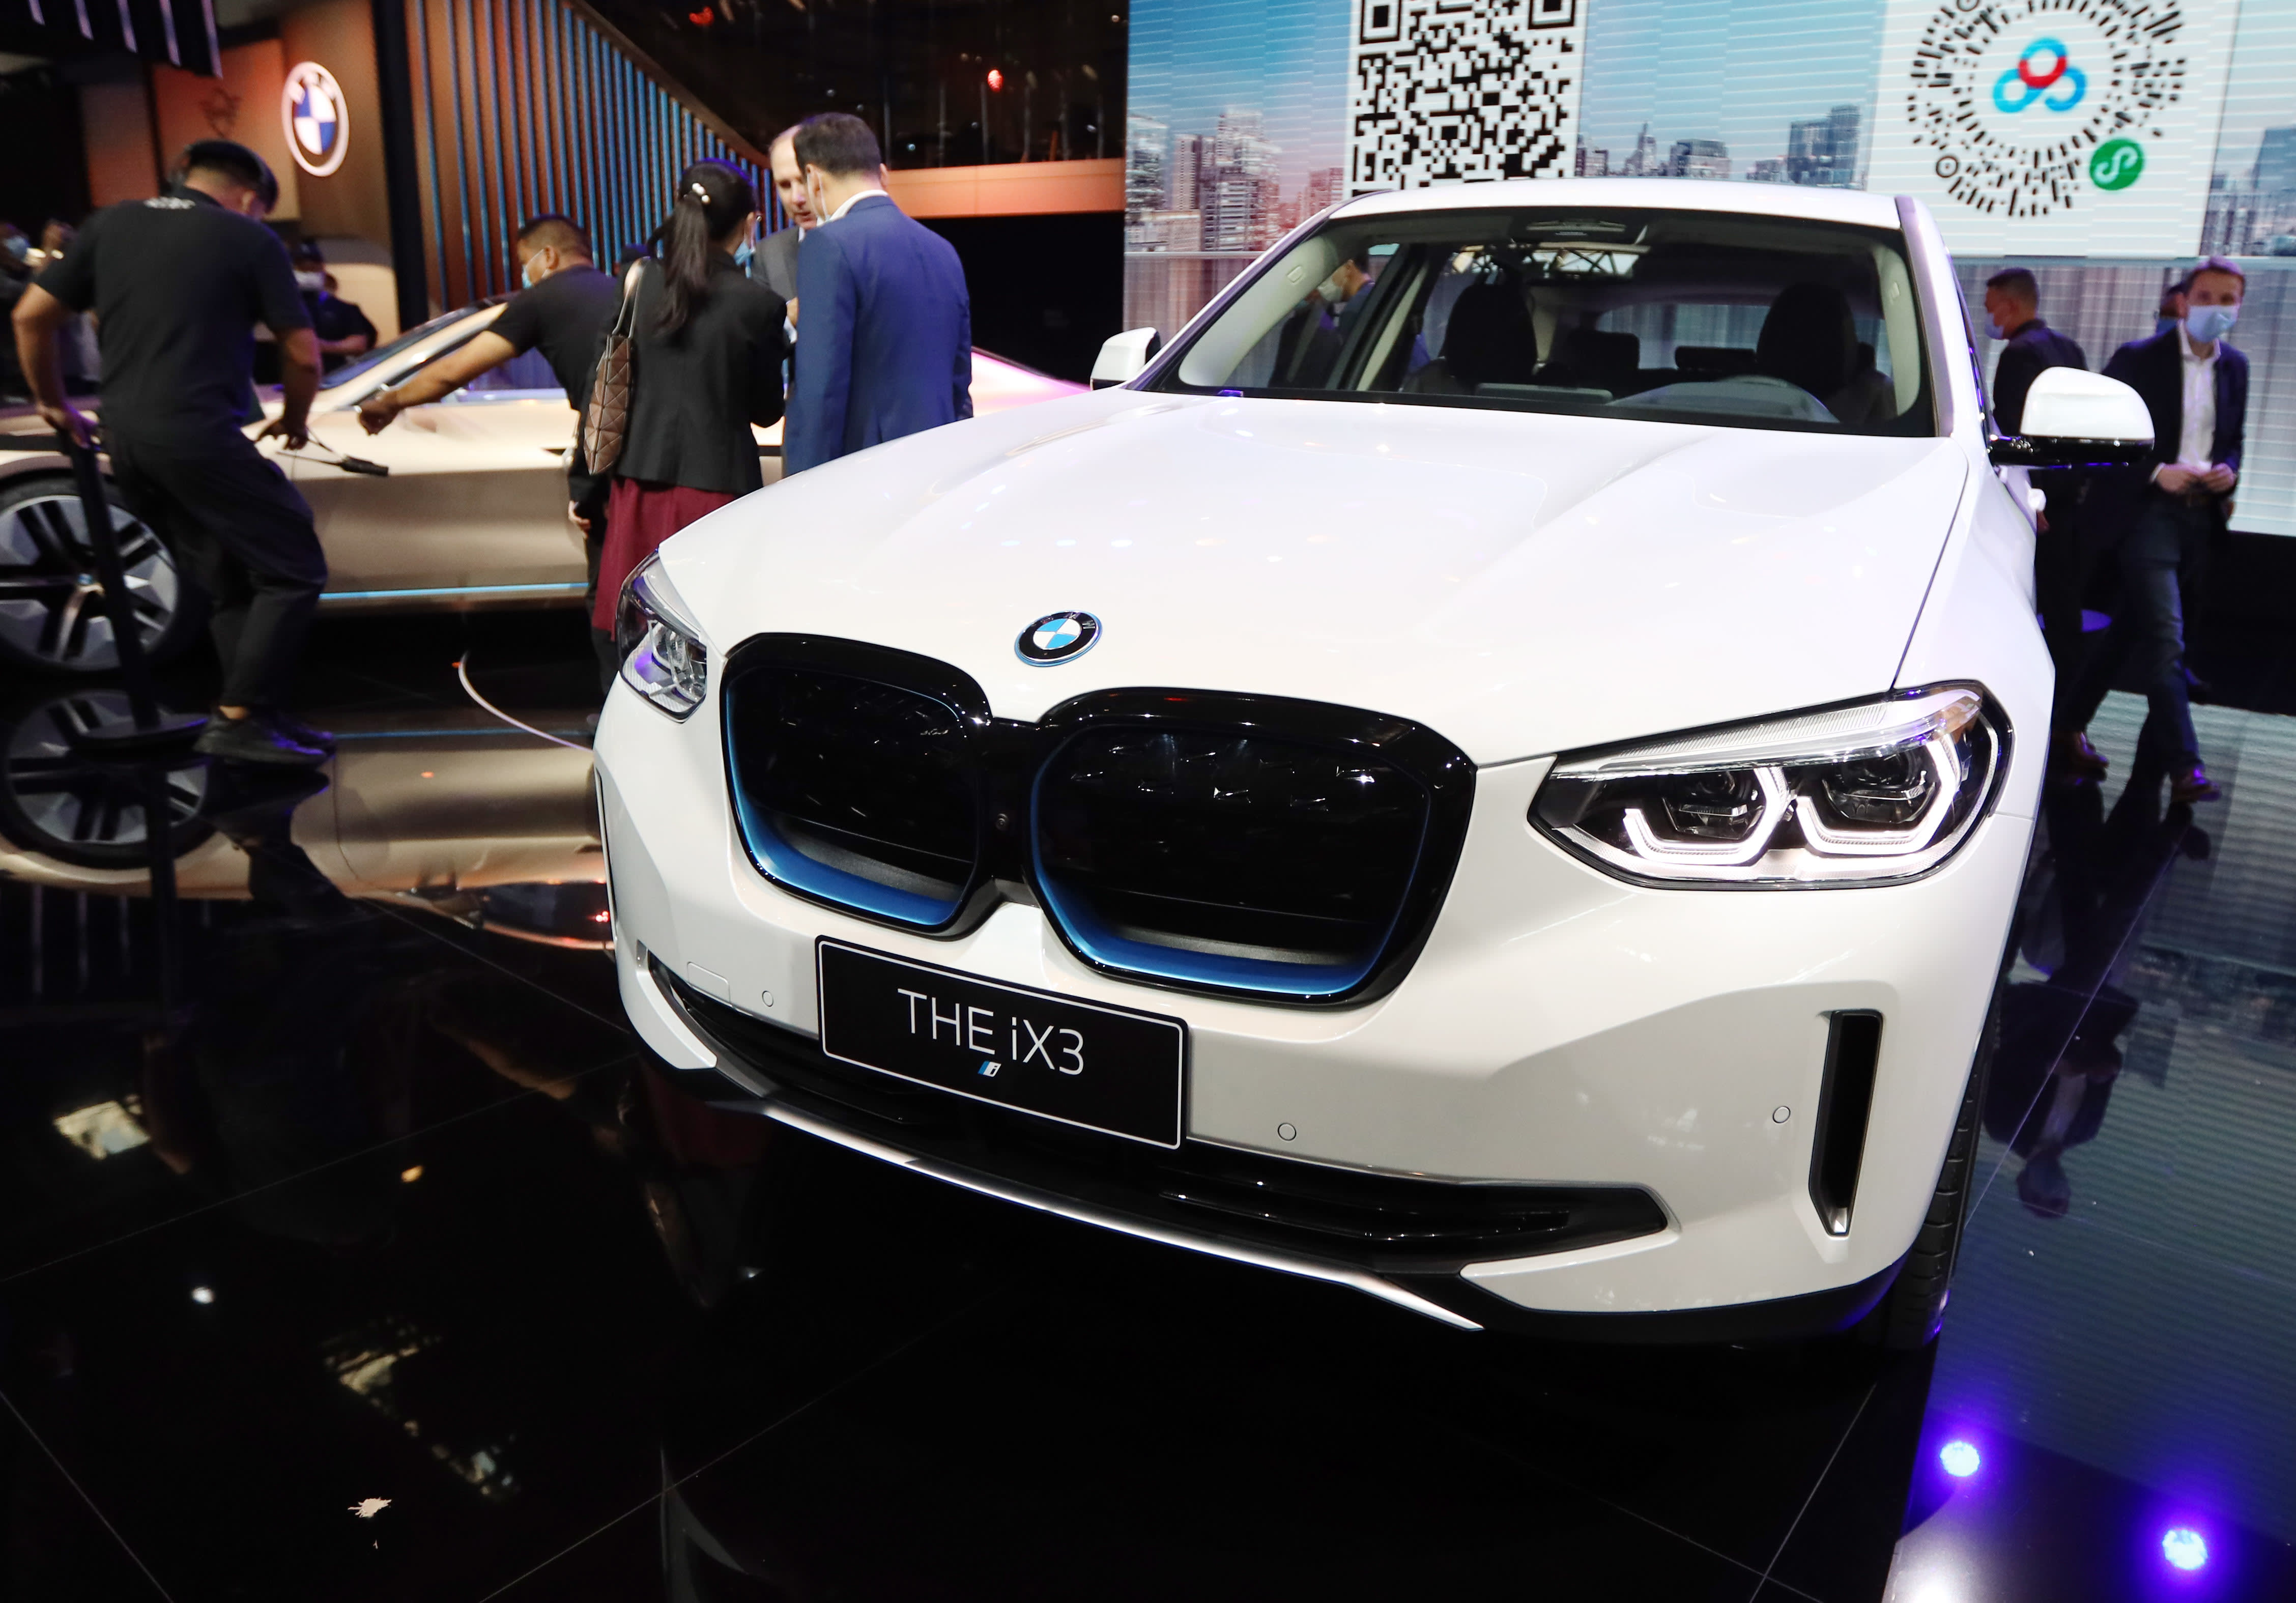 BMW slashes prices for its electric SUV made in China by $ 10,000